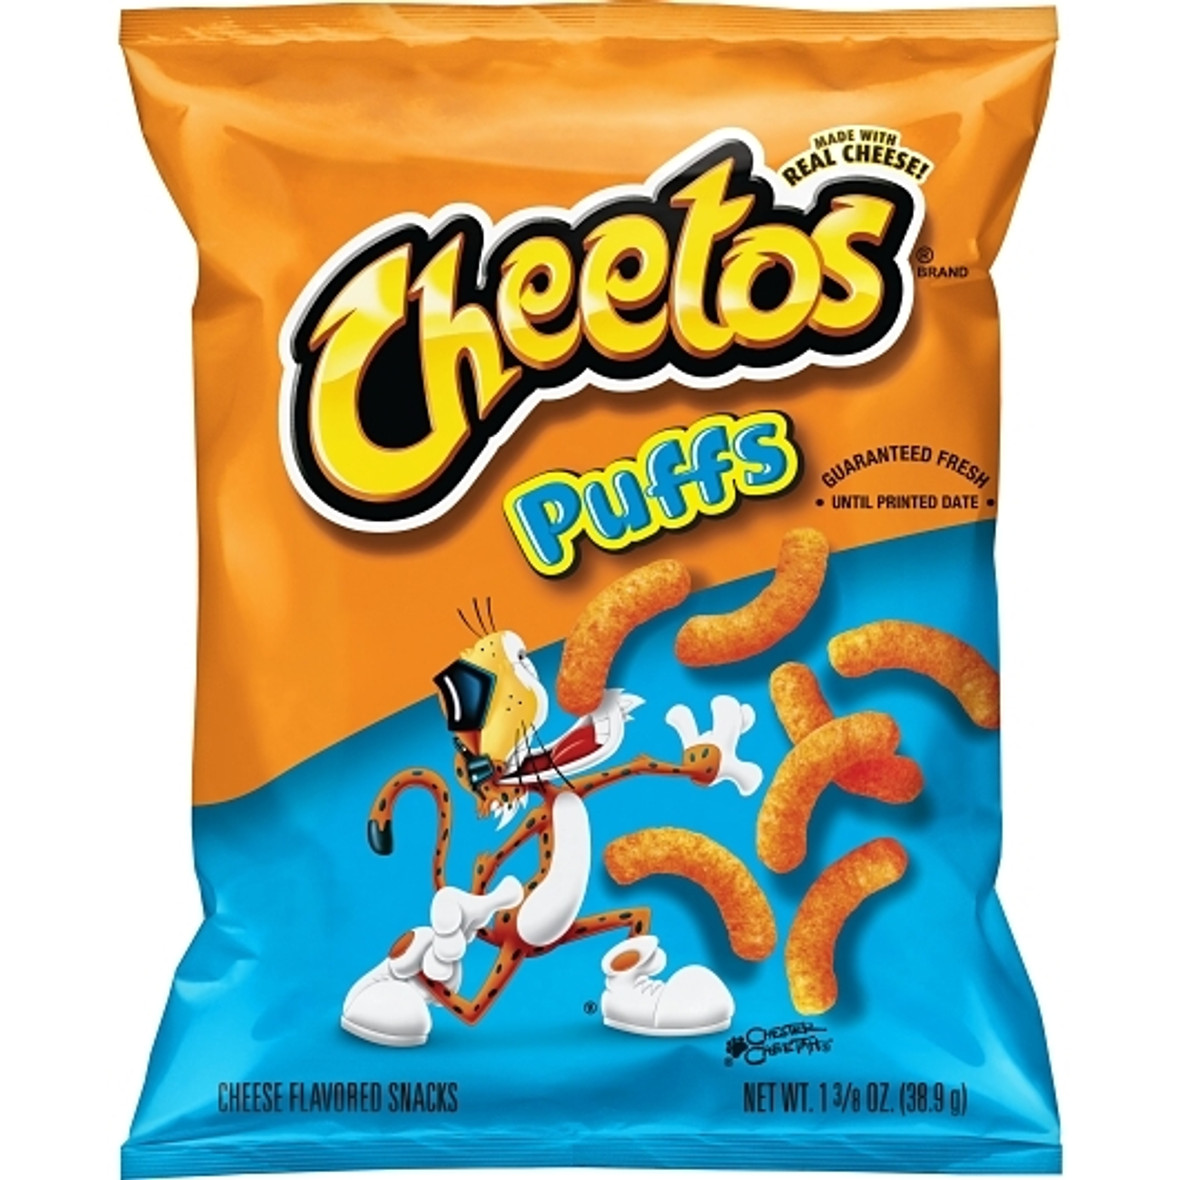 Cheetos Jumbo Puffs Cheese Flavored Snack, 1.375 Ounce, 64 Per Case